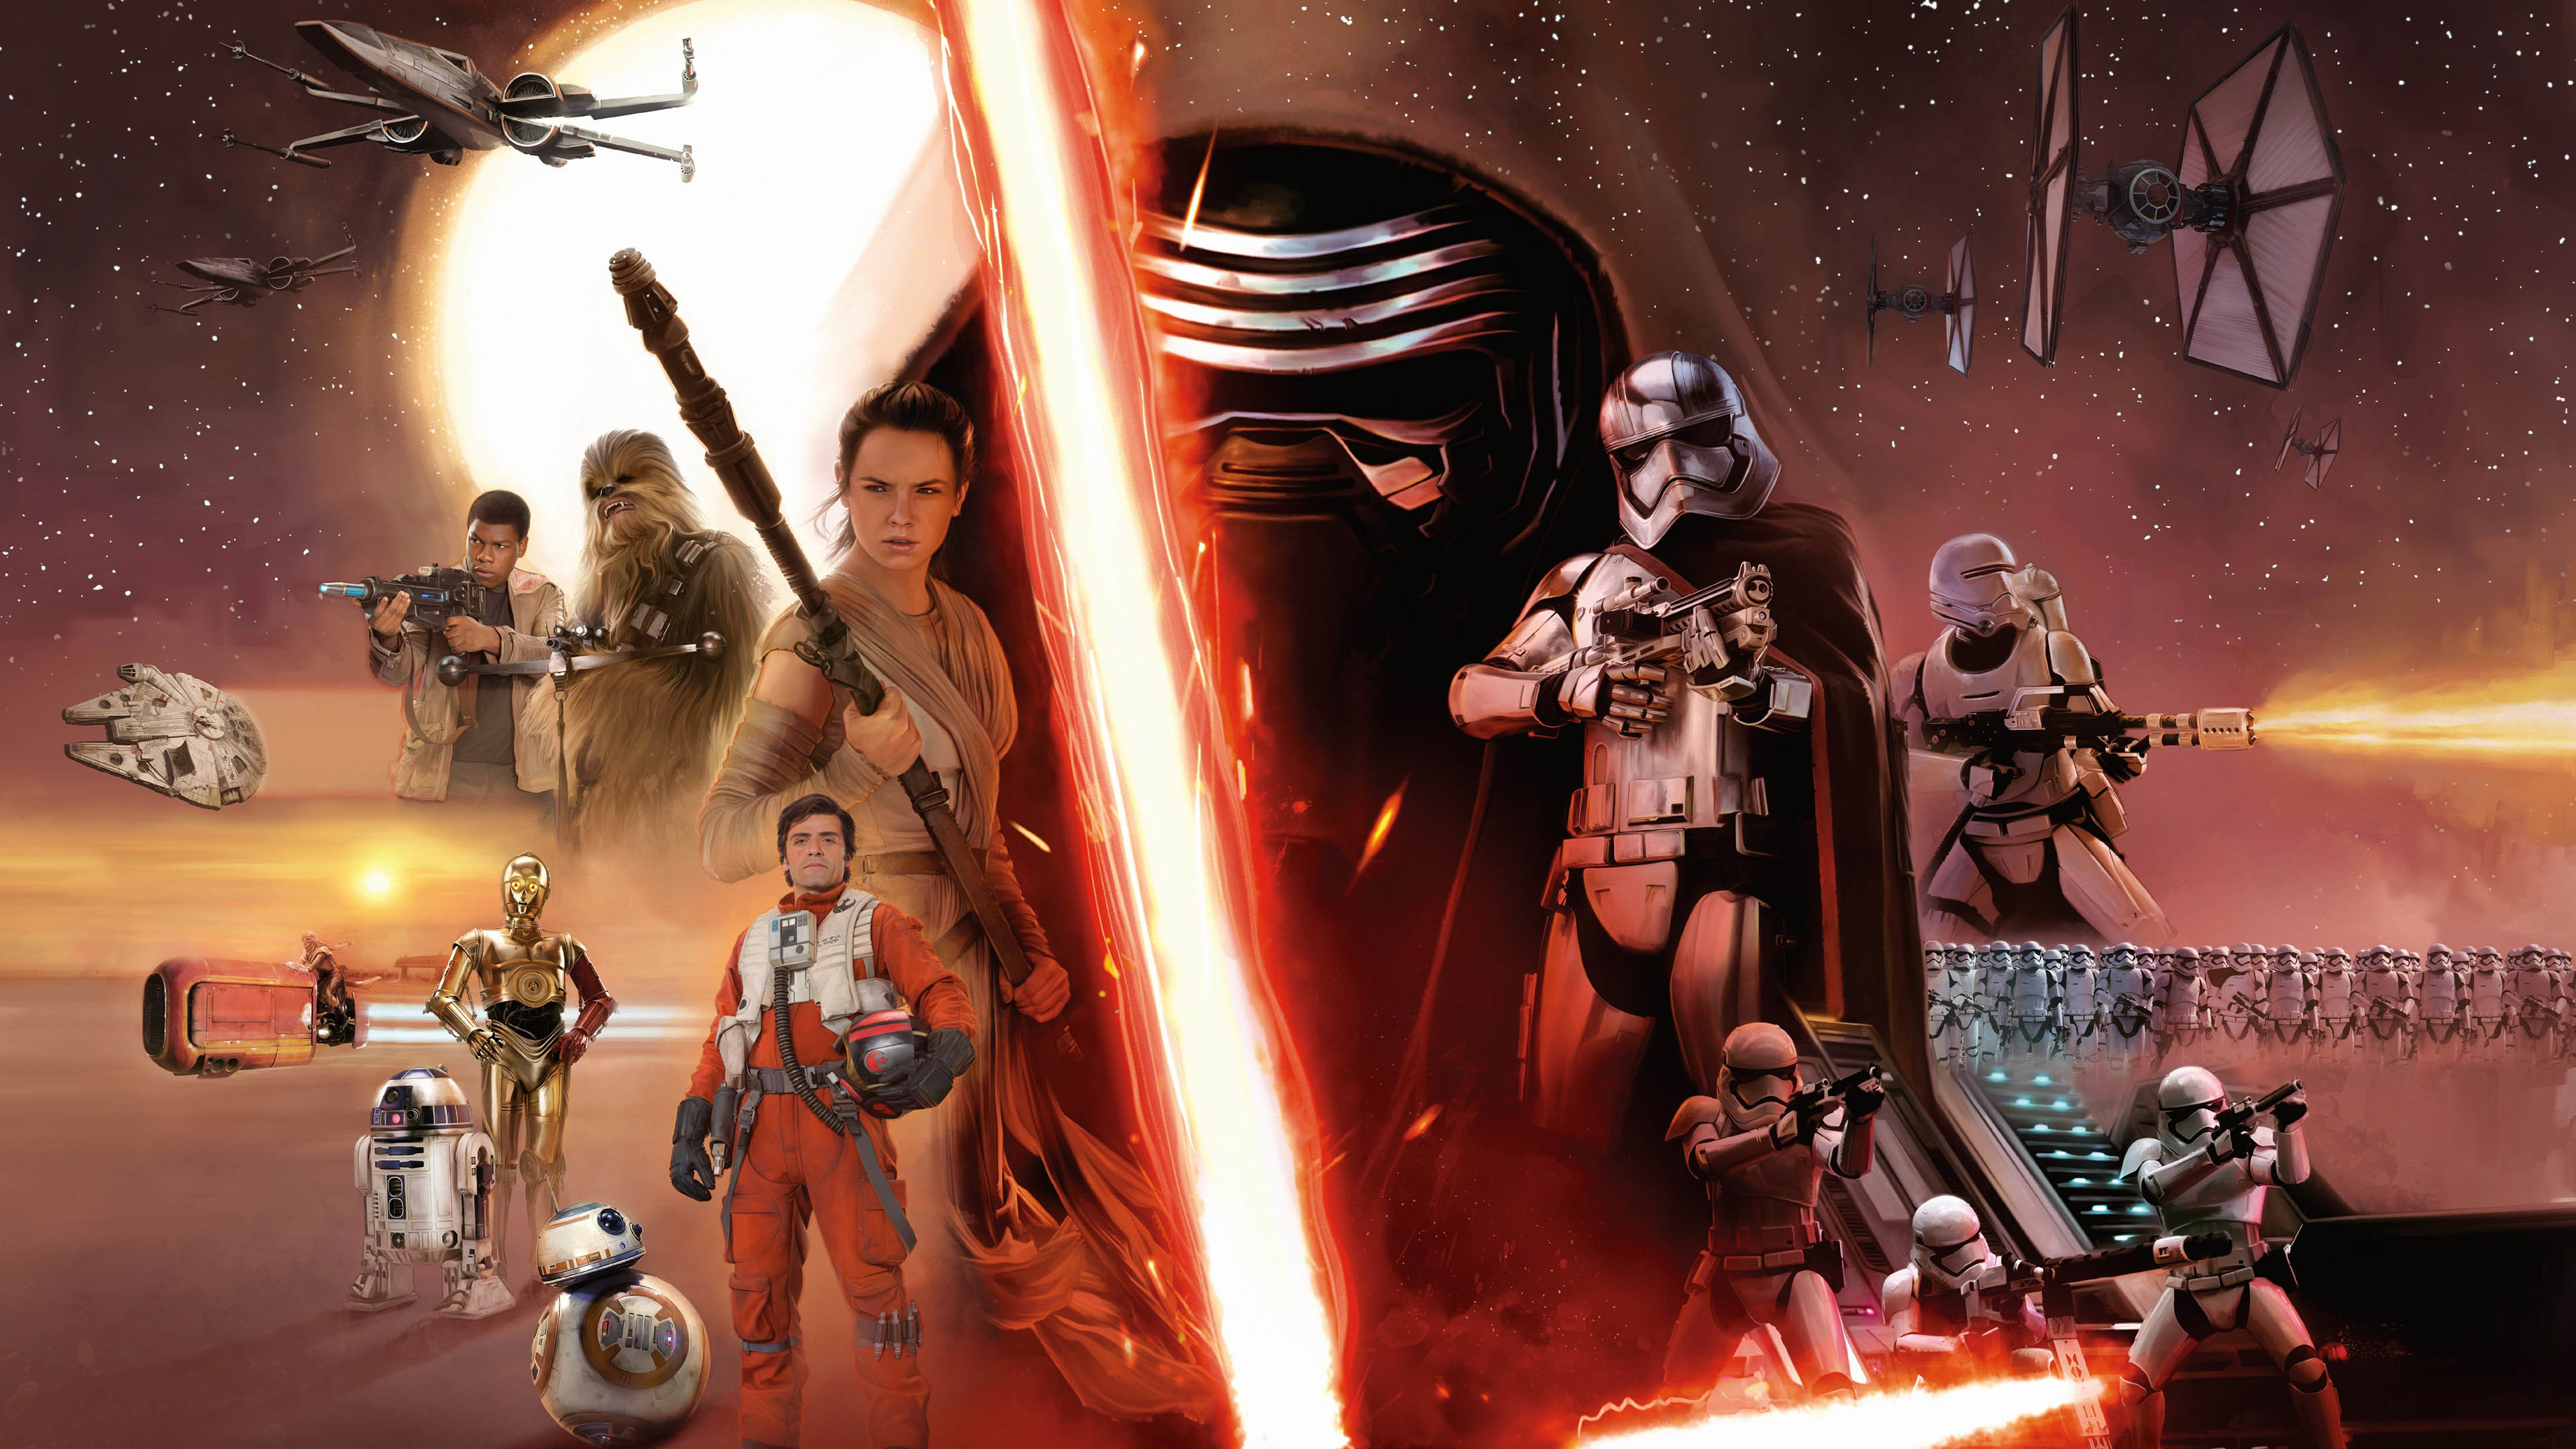 Star Wars, Episode 7: The Force Awakens Characters wallpaper